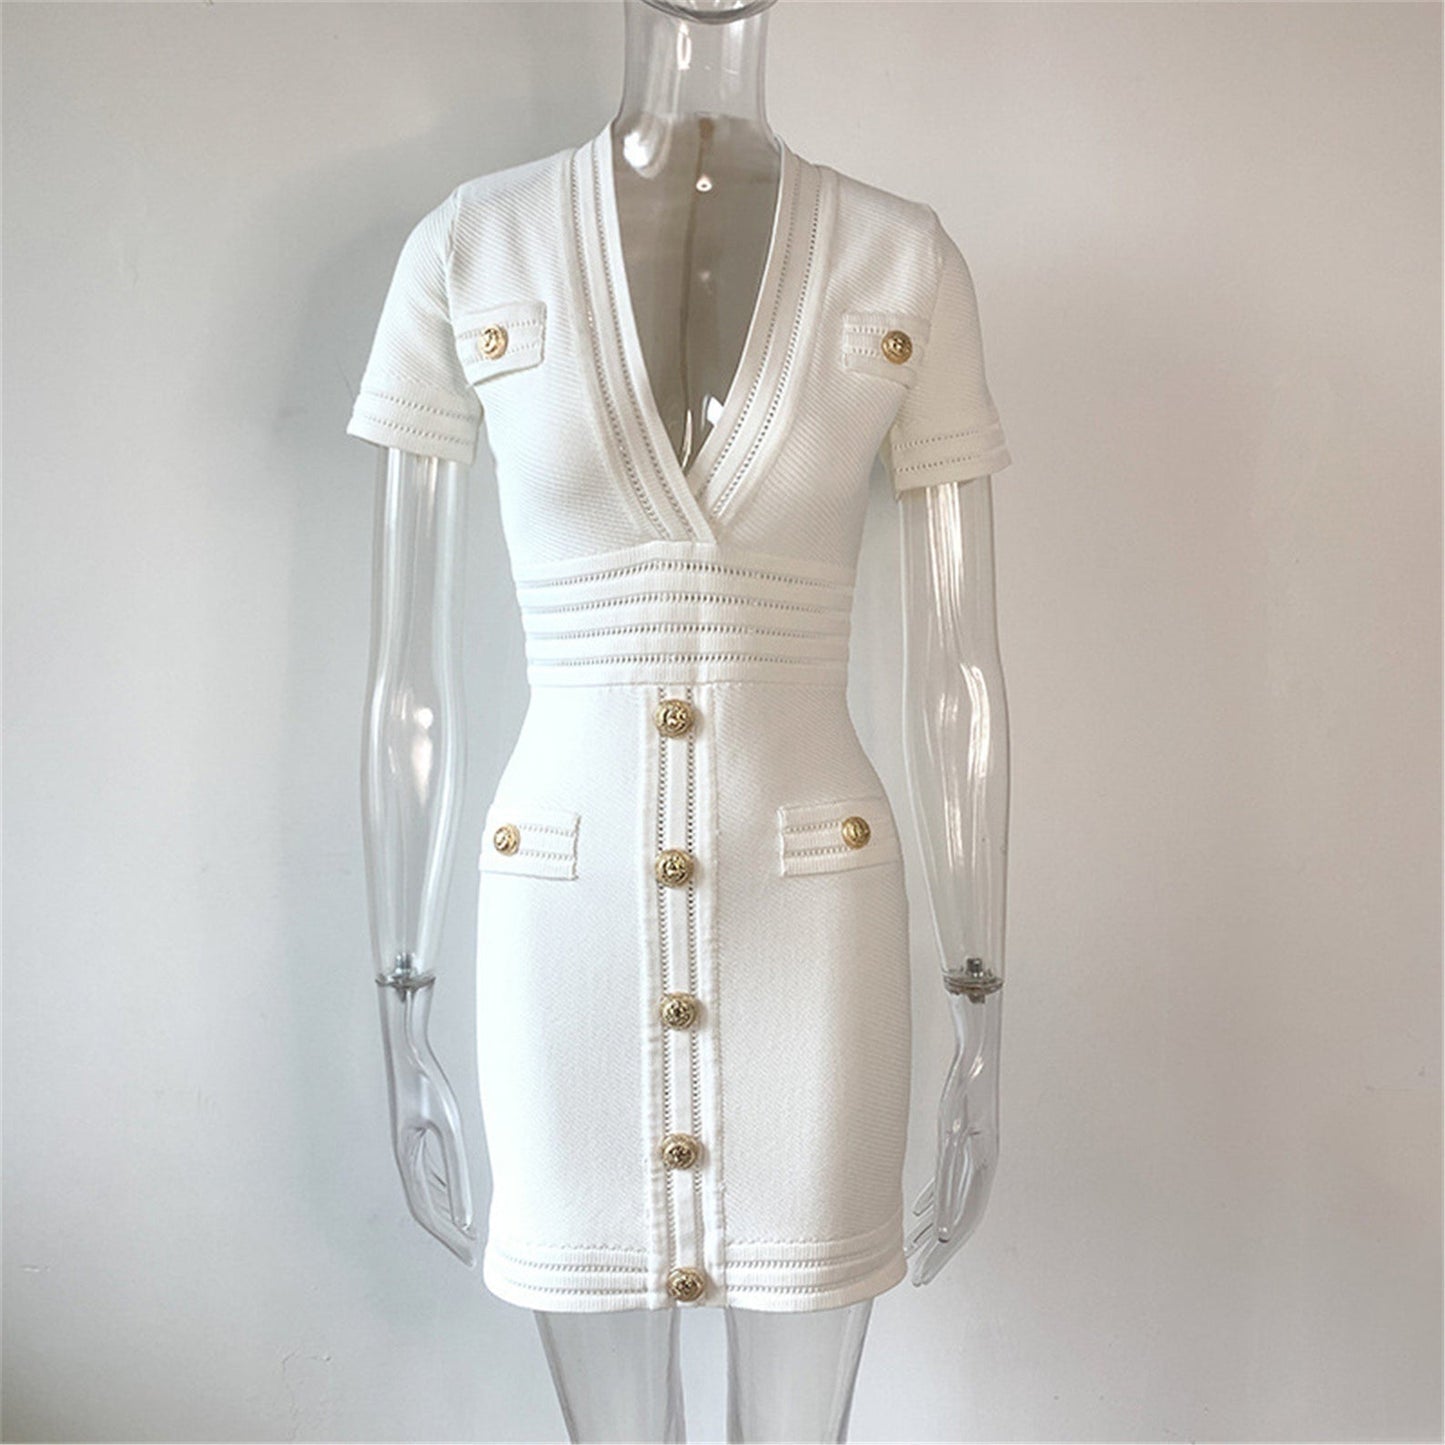 Women's Designer Inspired Golden Lion Button Deep V Neck White  Bodycon Dress  UK CUSTOMER SERVICE! Women's Designer Inspired Golden Lion Button Deep V Neck White Bodycon Dress, back zip with buttons.Dry cleaning and no machine wash.Women's bodycon are trendier as ever this season.  Size: UK 4-12/ EU 32-402/ US 0-8  Please leave your mobile number for the delivery.